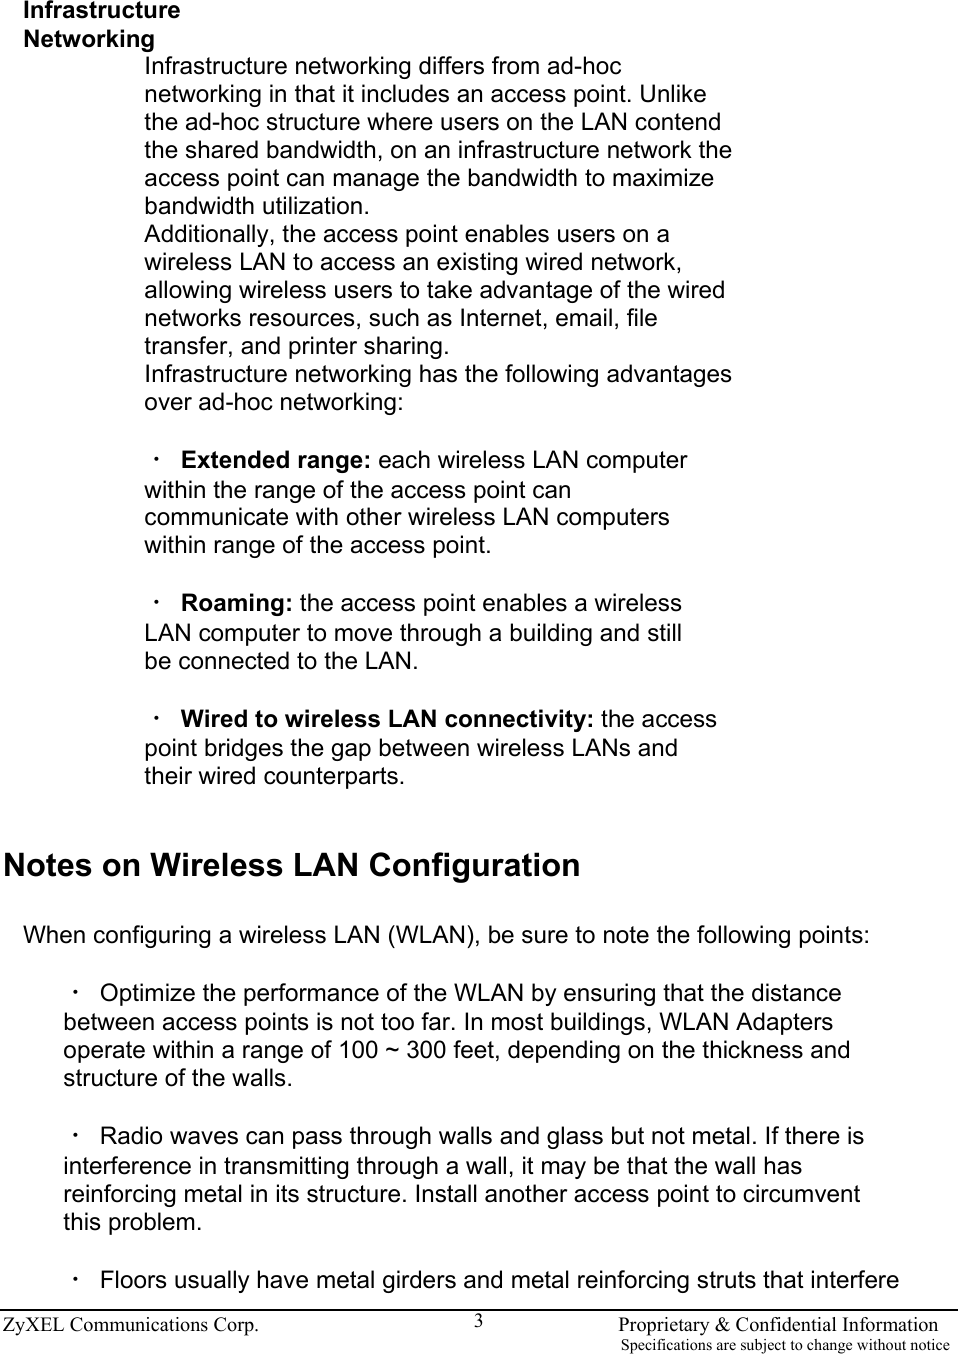  ZyXEL Communications Corp.                                                                       Proprietary &amp; Confidential Information                                                                                                                           Specifications are subject to change without notice 3 Infrastructure Networking Infrastructure networking differs from ad-hoc networking in that it includes an access point. Unlike the ad-hoc structure where users on the LAN contend the shared bandwidth, on an infrastructure network the access point can manage the bandwidth to maximize bandwidth utilization. Additionally, the access point enables users on a wireless LAN to access an existing wired network, allowing wireless users to take advantage of the wired networks resources, such as Internet, email, file transfer, and printer sharing. Infrastructure networking has the following advantages over ad-hoc networking:  ‧ Extended range: each wireless LAN computer within the range of the access point can communicate with other wireless LAN computers within range of the access point.  ‧ Roaming: the access point enables a wireless LAN computer to move through a building and still be connected to the LAN.  ‧ Wired to wireless LAN connectivity: the access point bridges the gap between wireless LANs and their wired counterparts.   Notes on Wireless LAN Configuration  When configuring a wireless LAN (WLAN), be sure to note the following points:  ‧ Optimize the performance of the WLAN by ensuring that the distance between access points is not too far. In most buildings, WLAN Adapters operate within a range of 100 ~ 300 feet, depending on the thickness and structure of the walls.  ‧ Radio waves can pass through walls and glass but not metal. If there is interference in transmitting through a wall, it may be that the wall has reinforcing metal in its structure. Install another access point to circumvent this problem.  ‧ Floors usually have metal girders and metal reinforcing struts that interfere 